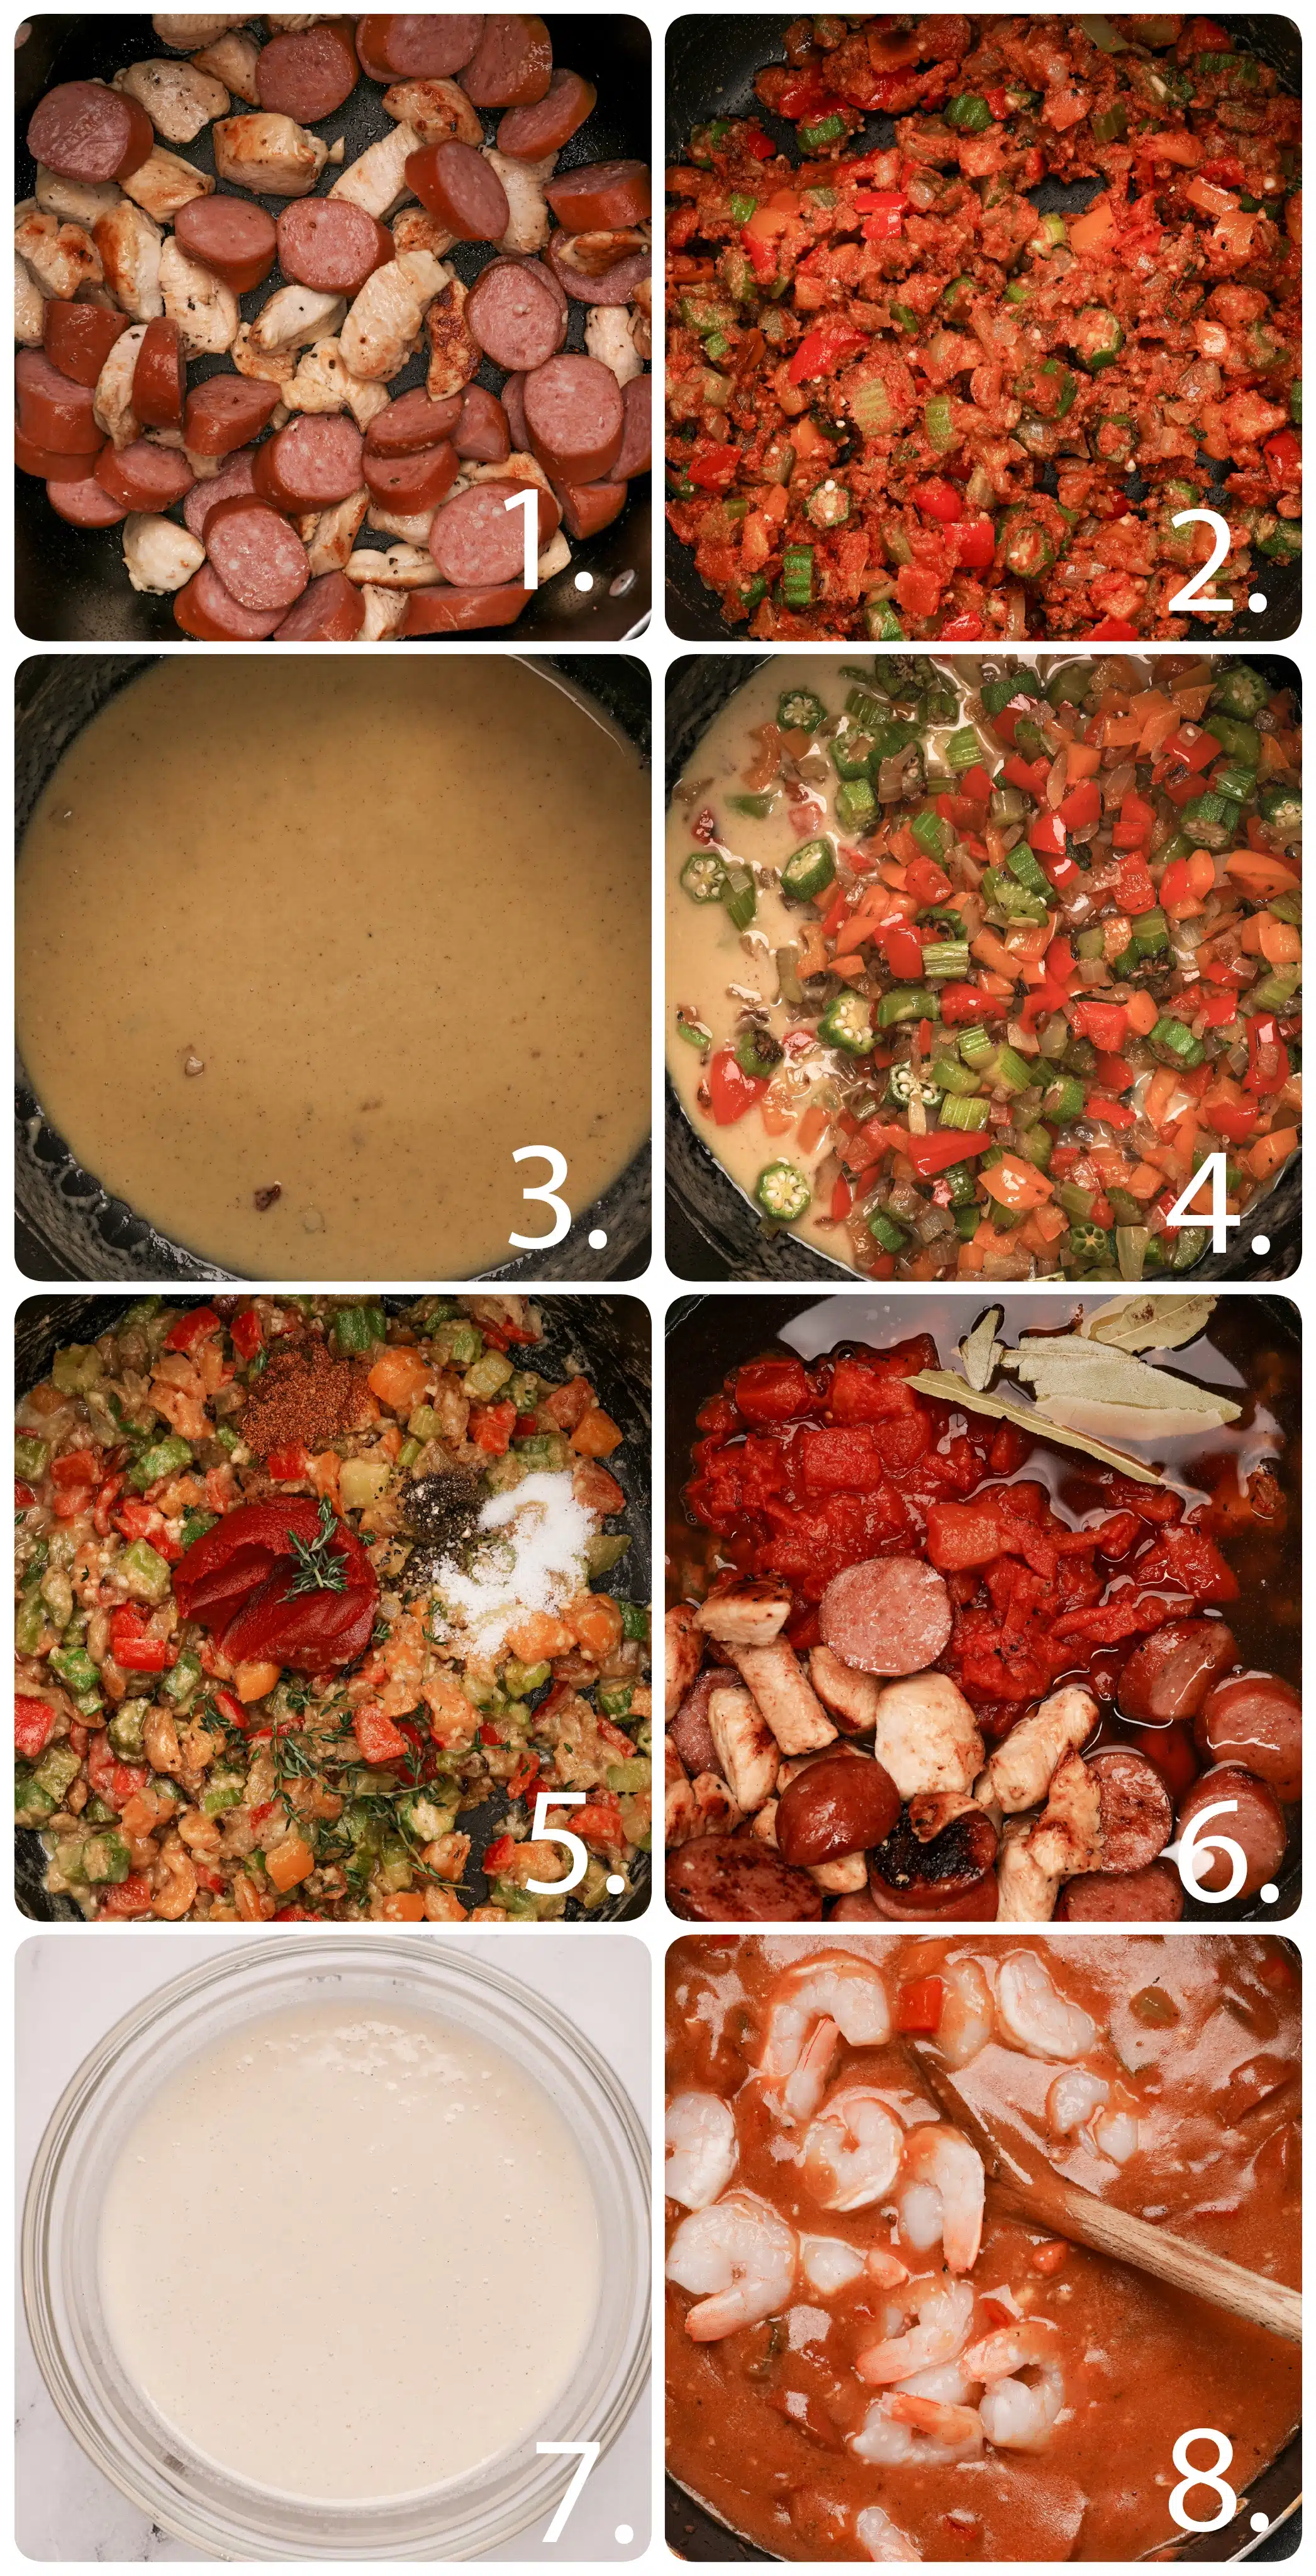 Gluten-free gumbo step by step